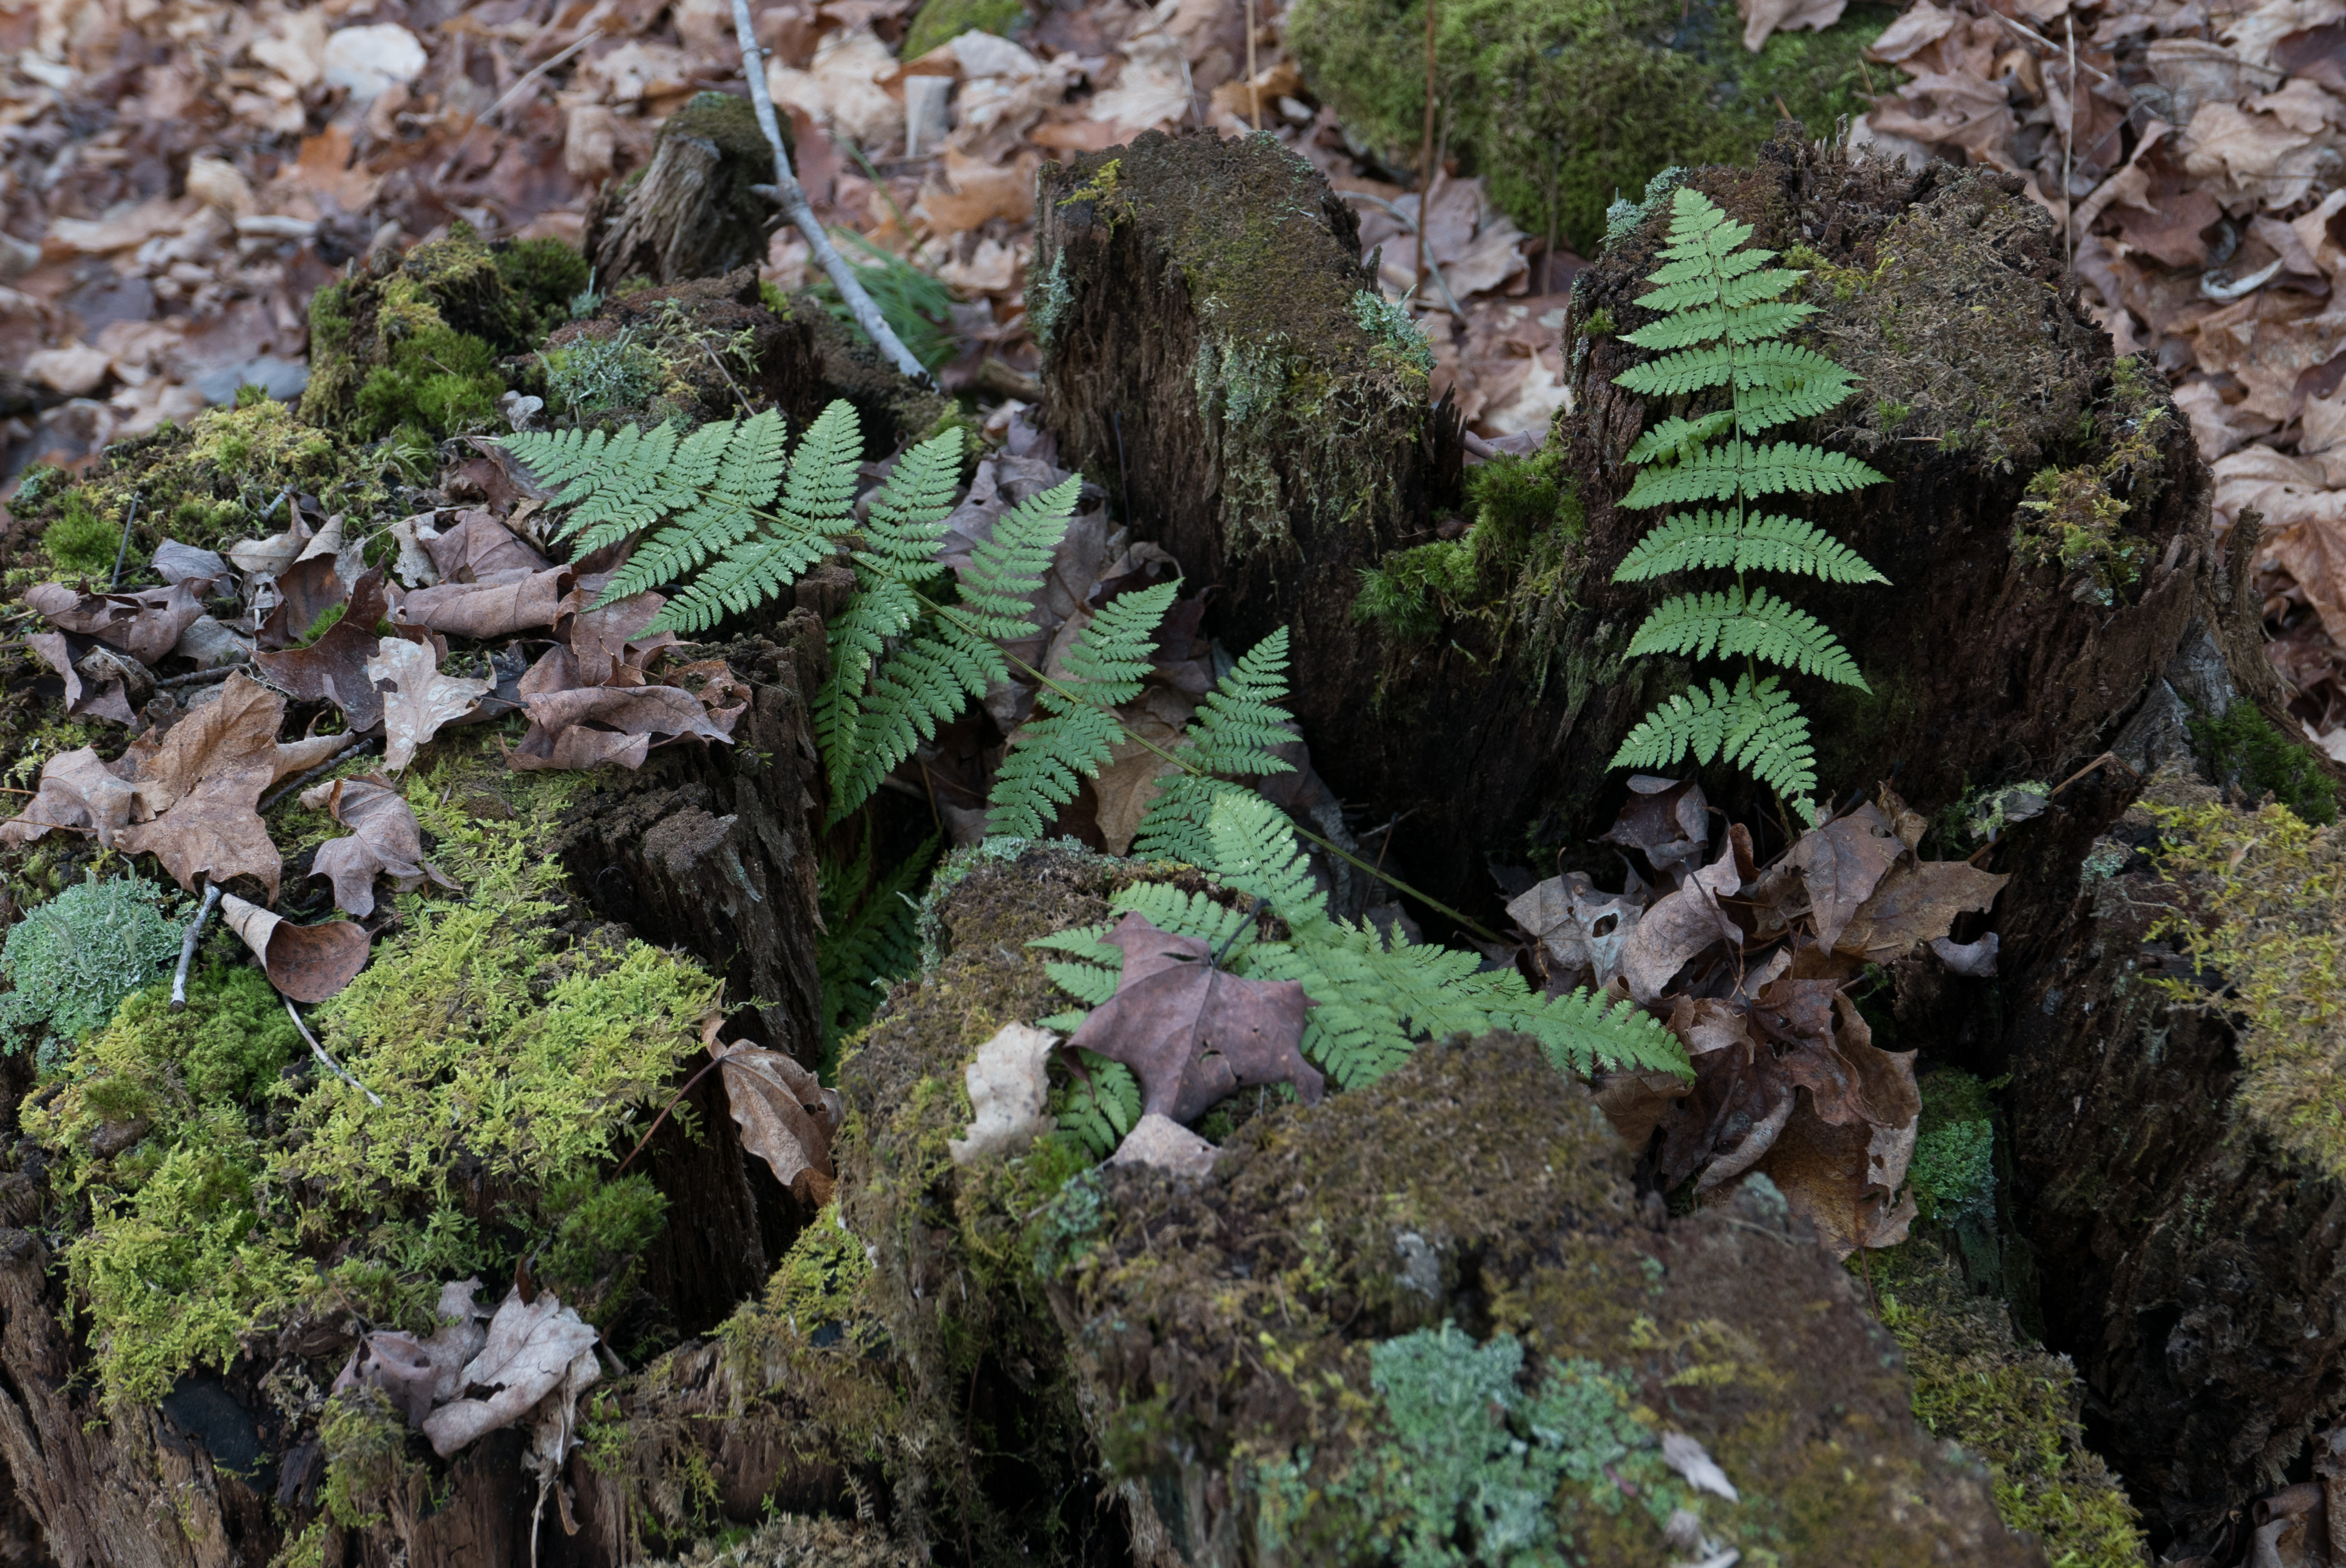 Moss, ferns and decaying stumps make up this part of the woods.